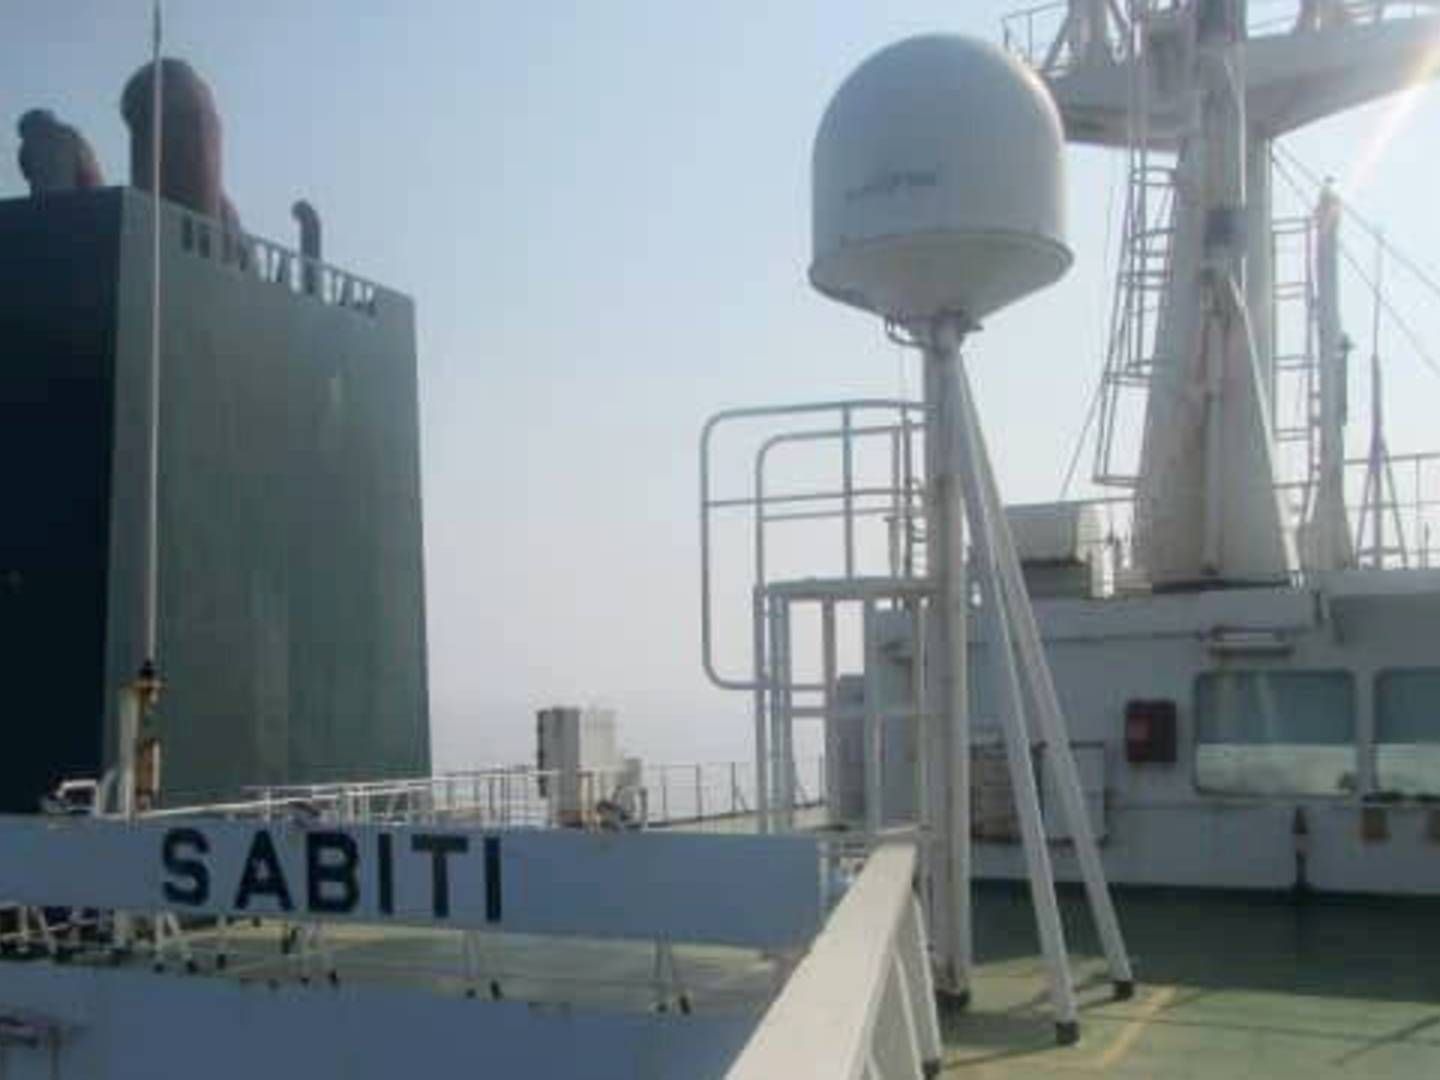 According to several reports, tanker vessel Sabiti was attacked by missiles last week. | Photo: Wana News Agency/VIA REUTERS / X07016